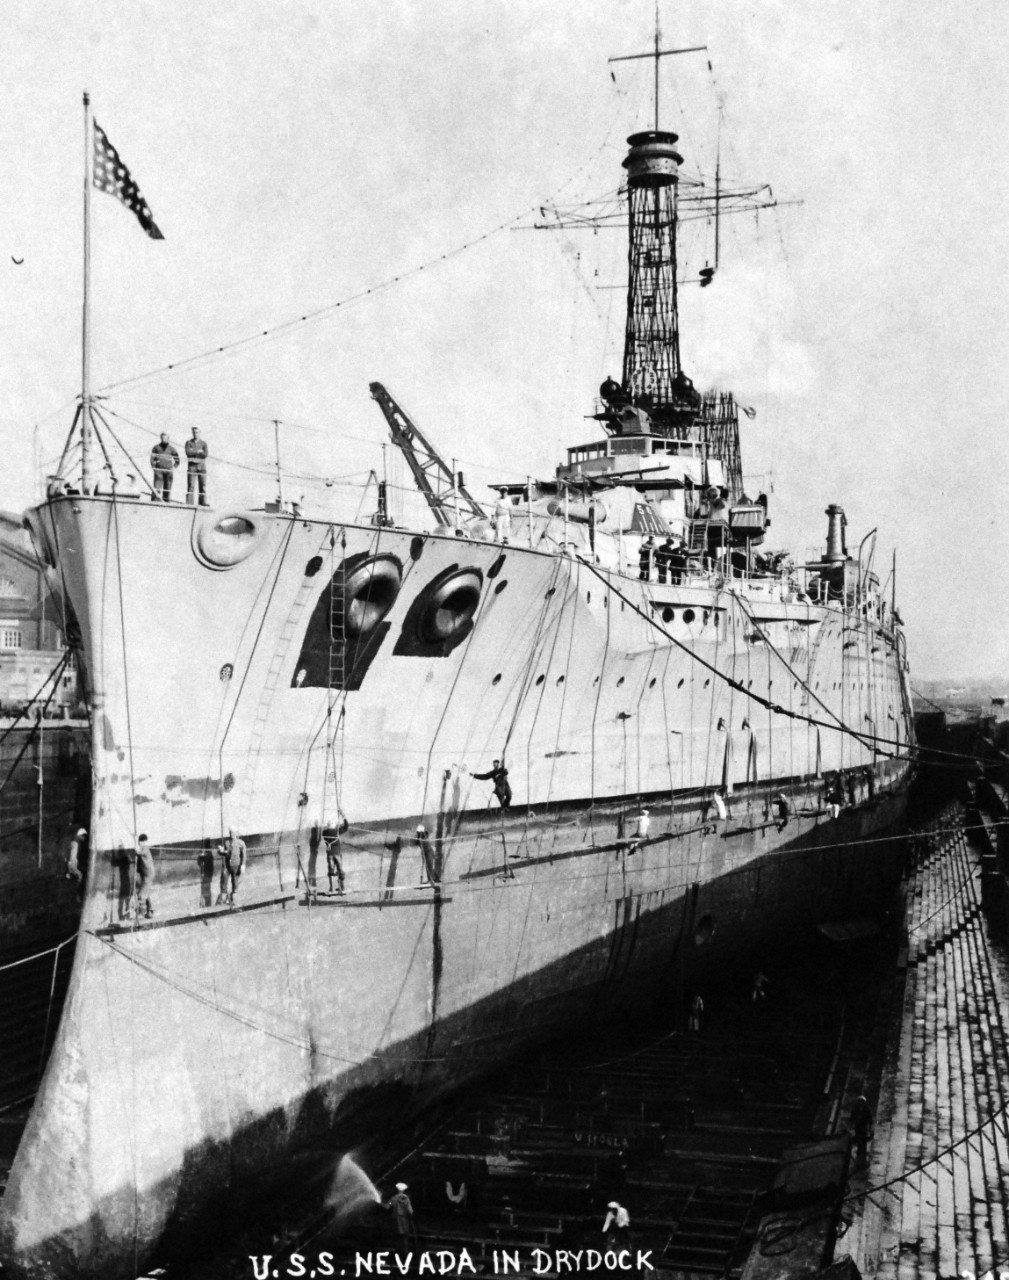 80-G-461423:  USS Nevada (BB-36), circa 1921.  Nevada in drydock.   Photograph received 1921.  Official U.S. Navy Photograph, now in the collections of the National Archives. 